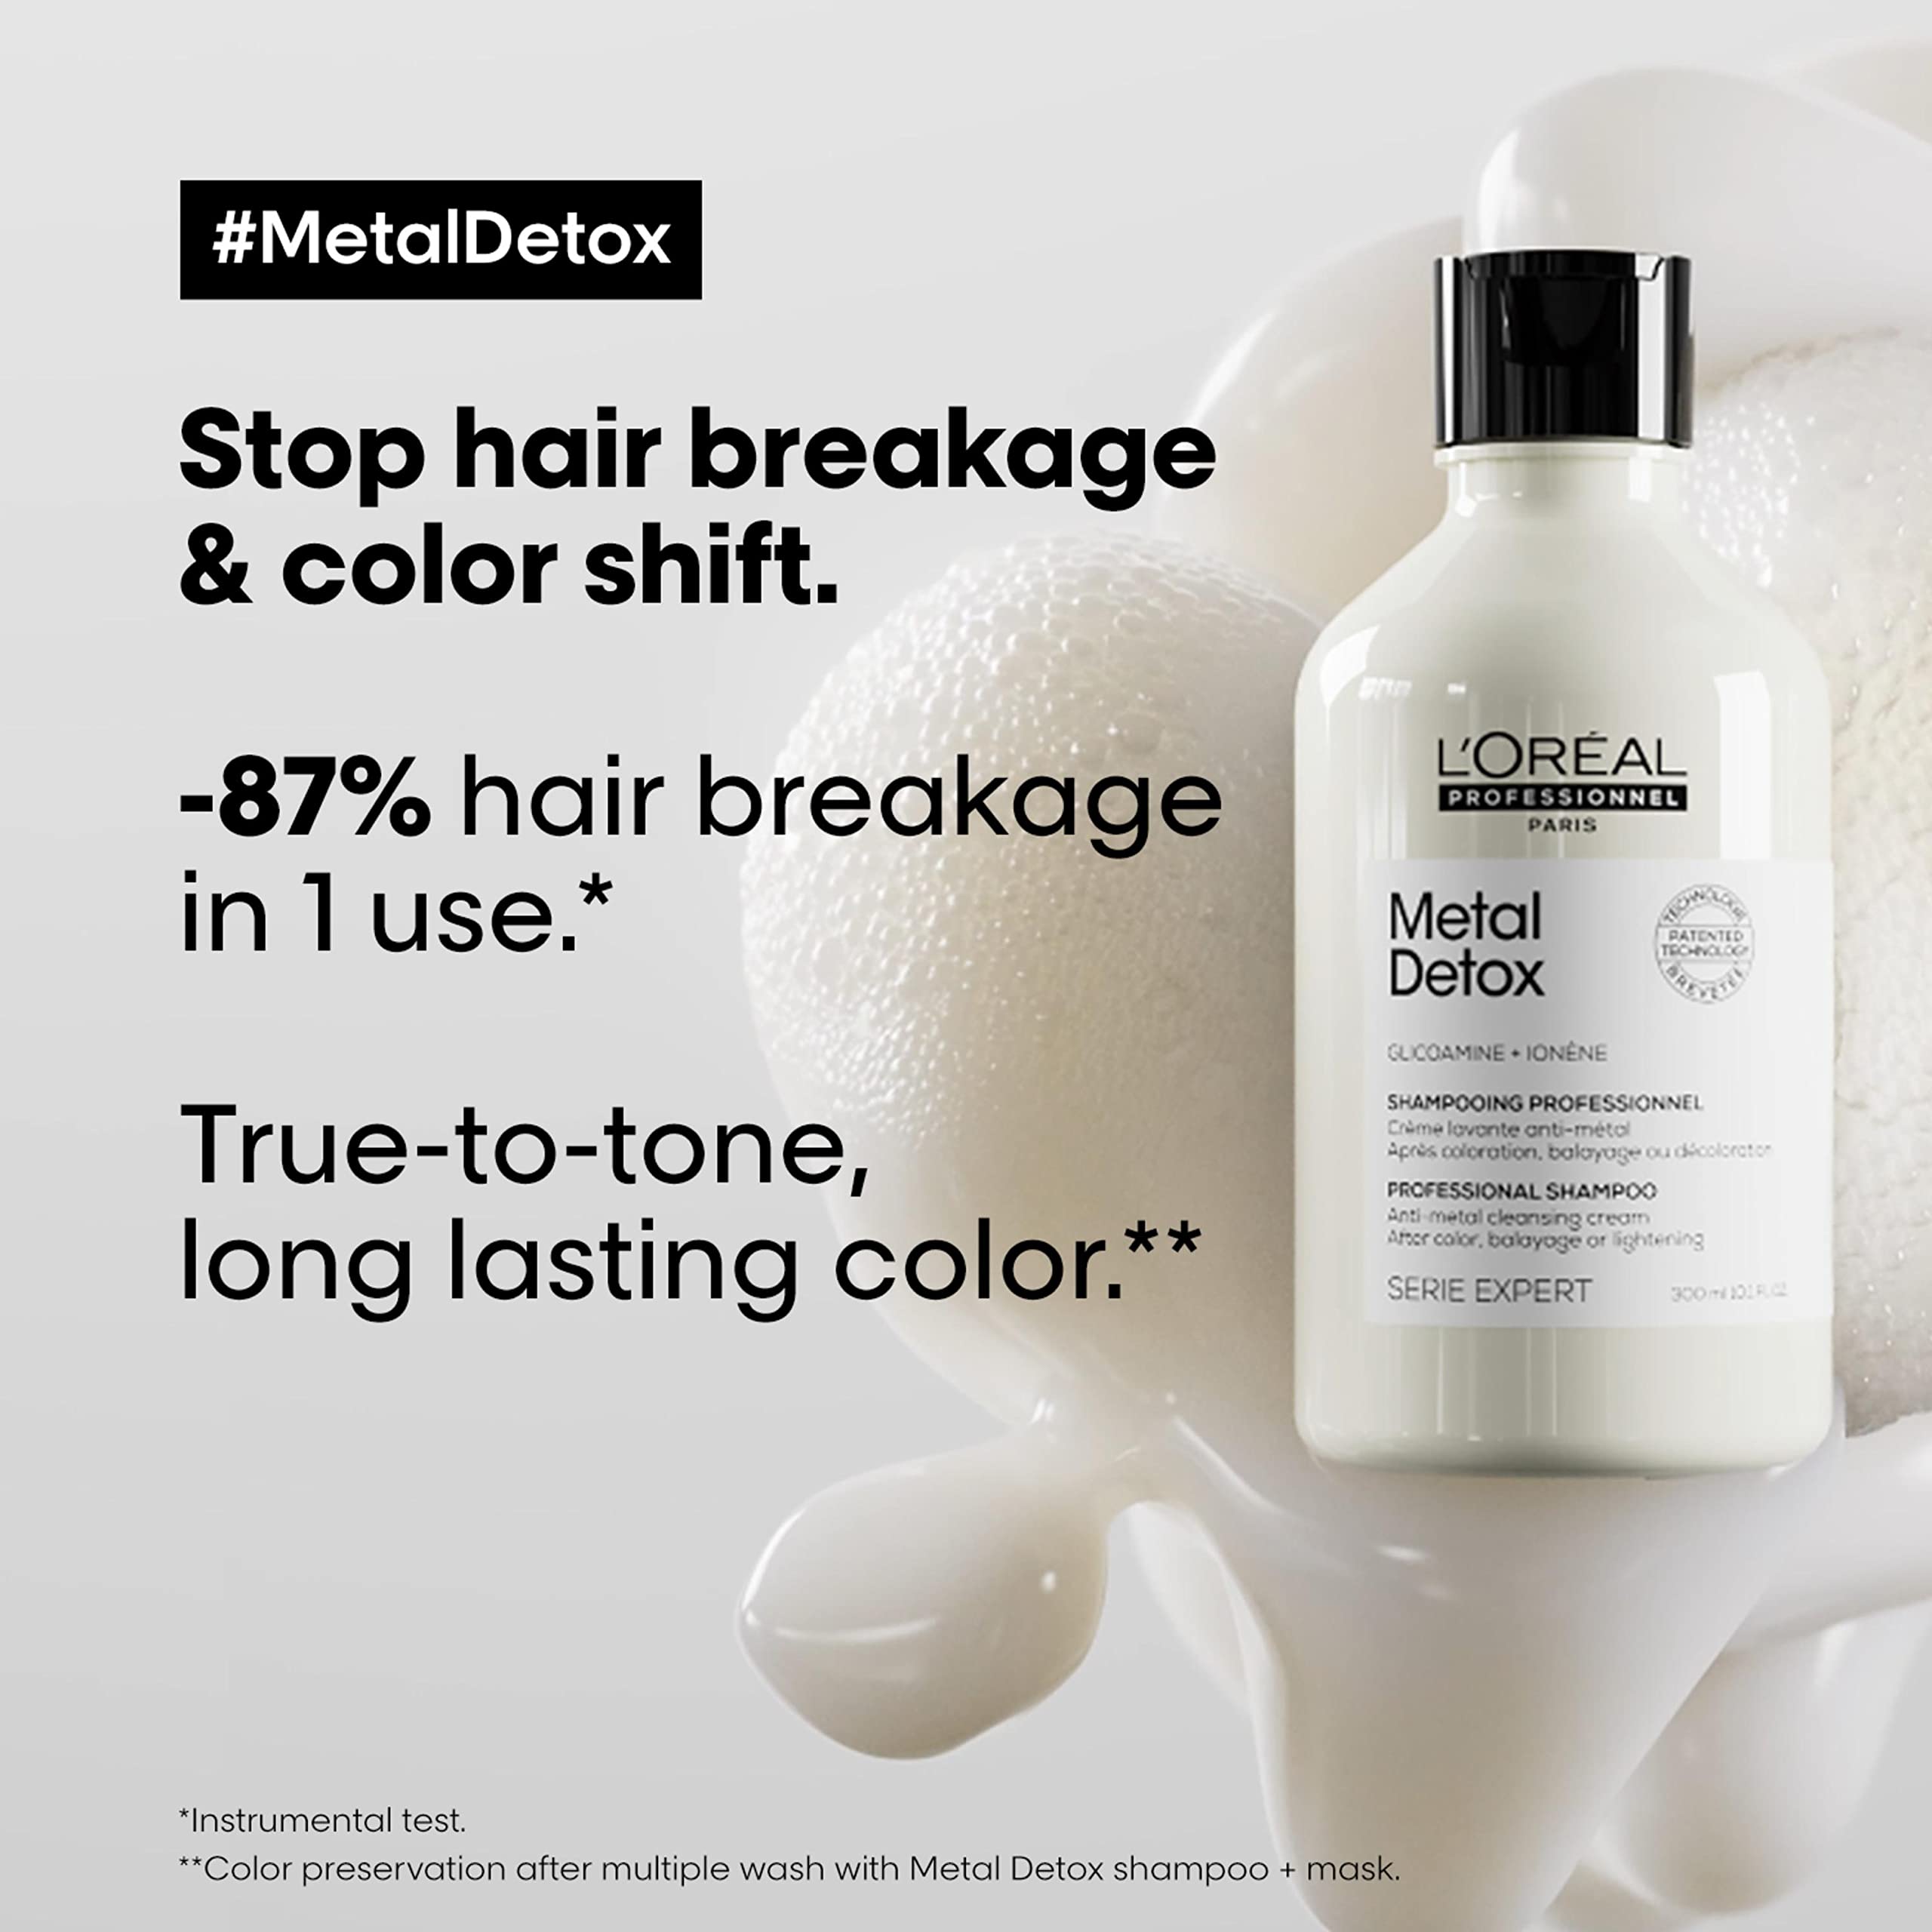 L’Oréal Professionnel Metal Detox Shampoo, Protects Color-Treated Hair From Damage and Breakage, For Smooth, Strong & Shiny Looking Hair, Rich & Creamy Texture, Serie Expert, 300 ml